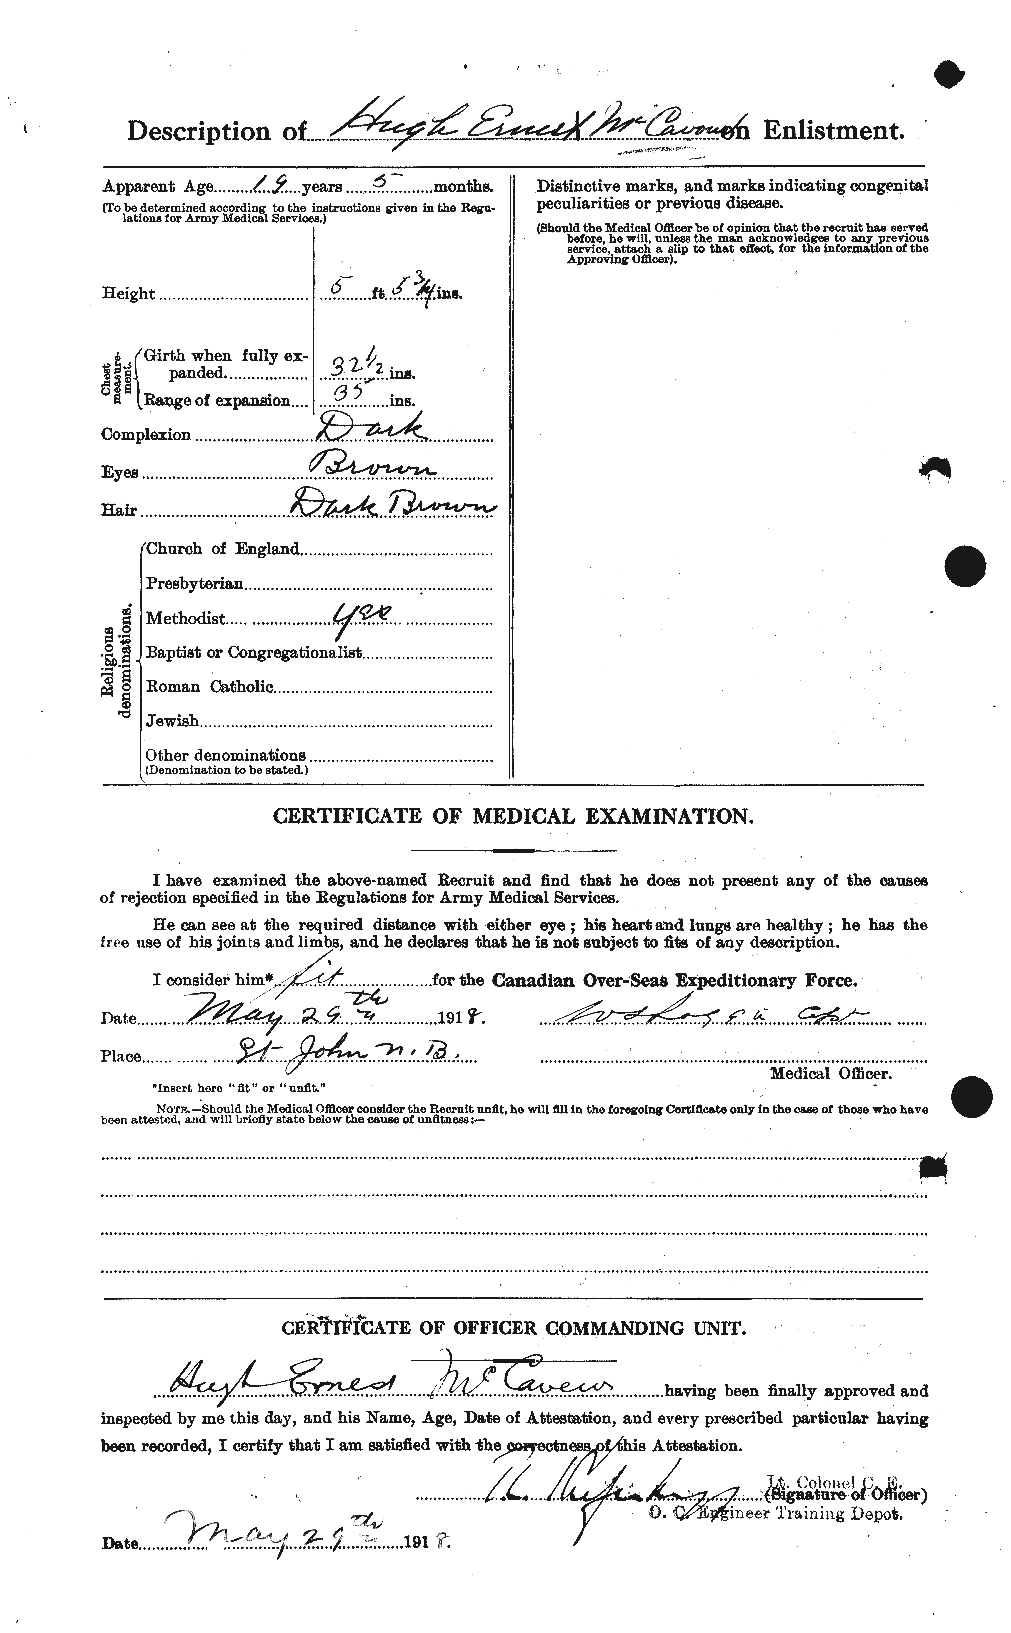 Personnel Records of the First World War - CEF 132552b